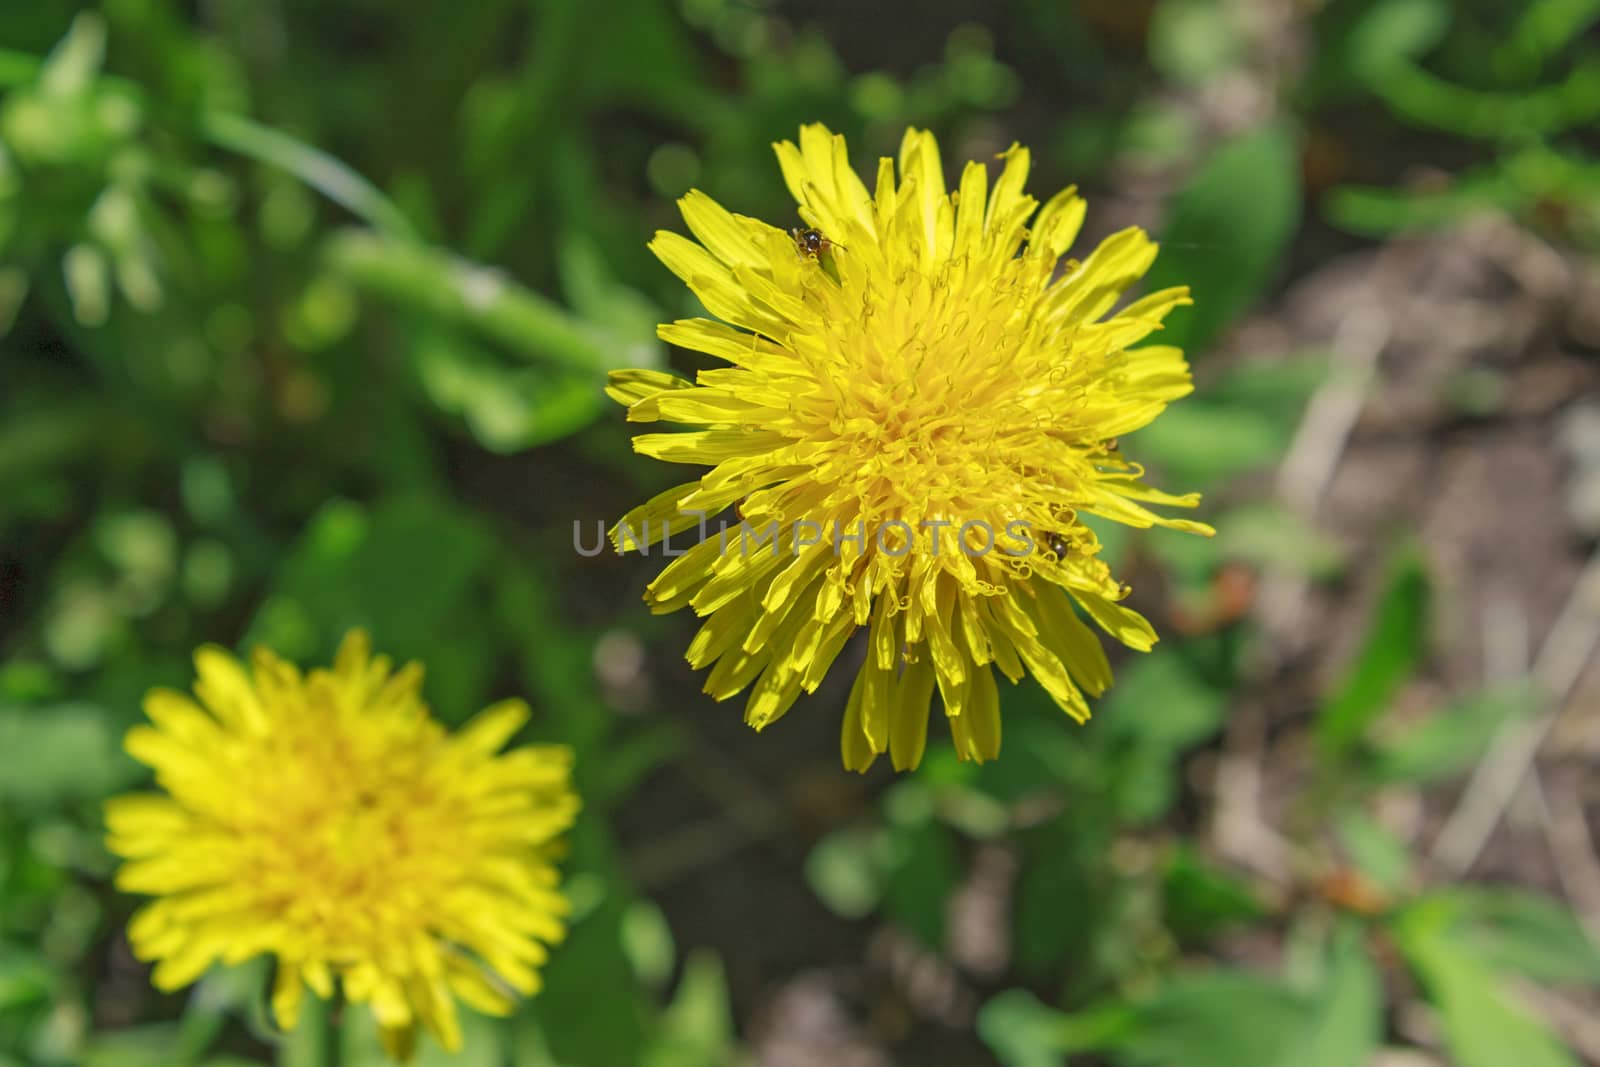 Yellow dandelion flowers with leaves in green grass, spring photo by aarrows